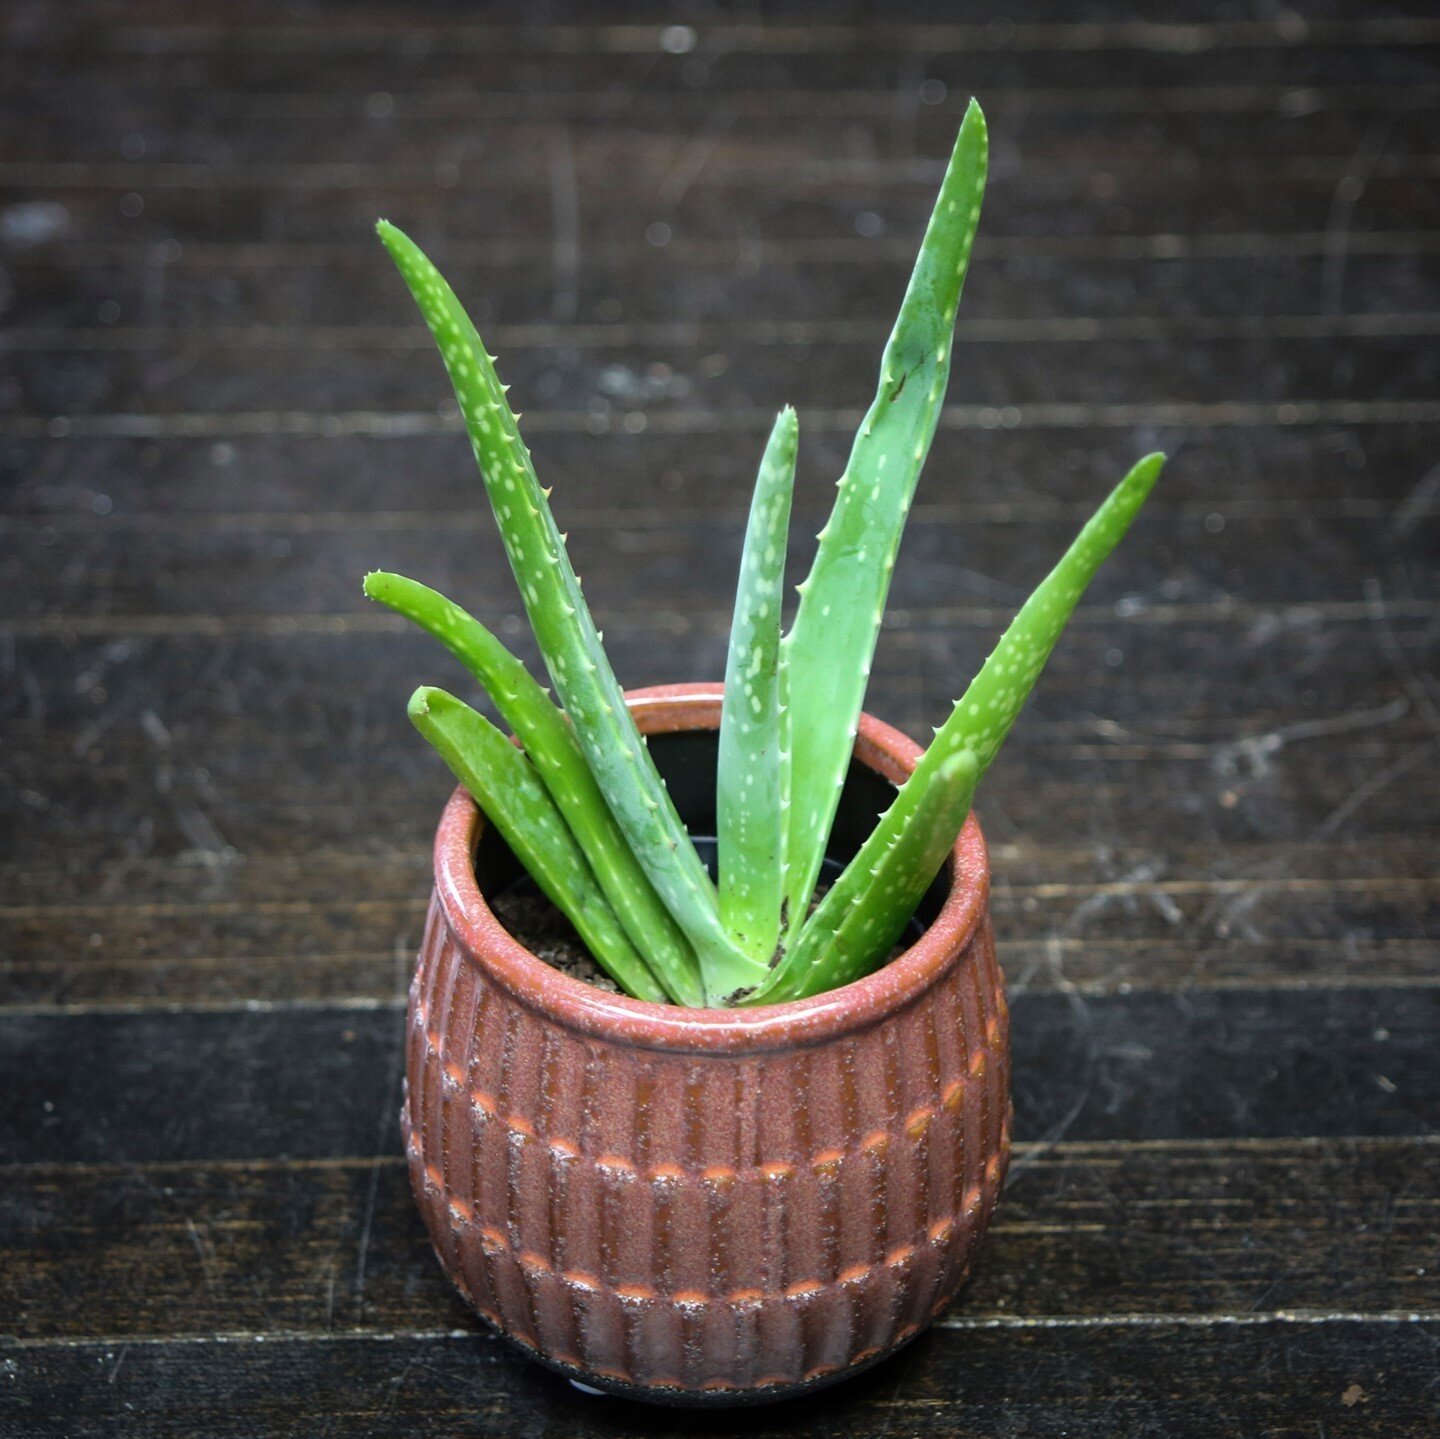 Aloe Vera is back in the shop! This plant makes a wonderful gift because of its practical applications. Stop by the shop next time your shopping for a gift!
.
.
.
#aloevera #aloe #plantdecor #plantenabler #plantgoals #plantlove #plantparenthood #plan